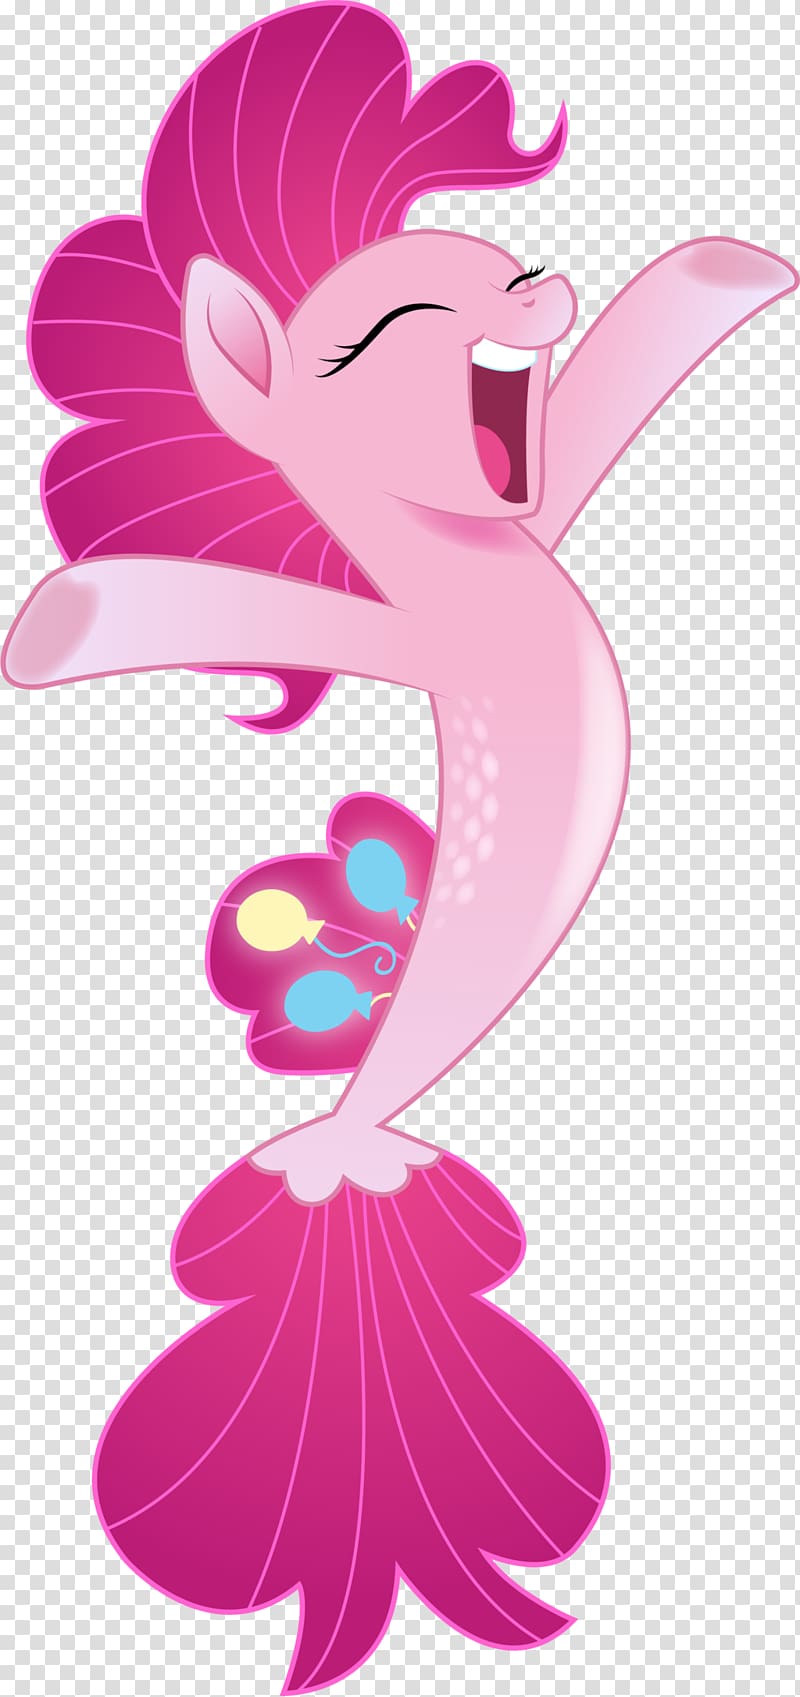 Pinkie Pie Pony Horse Maud Pie Winged unicorn, horse transparent background PNG clipart